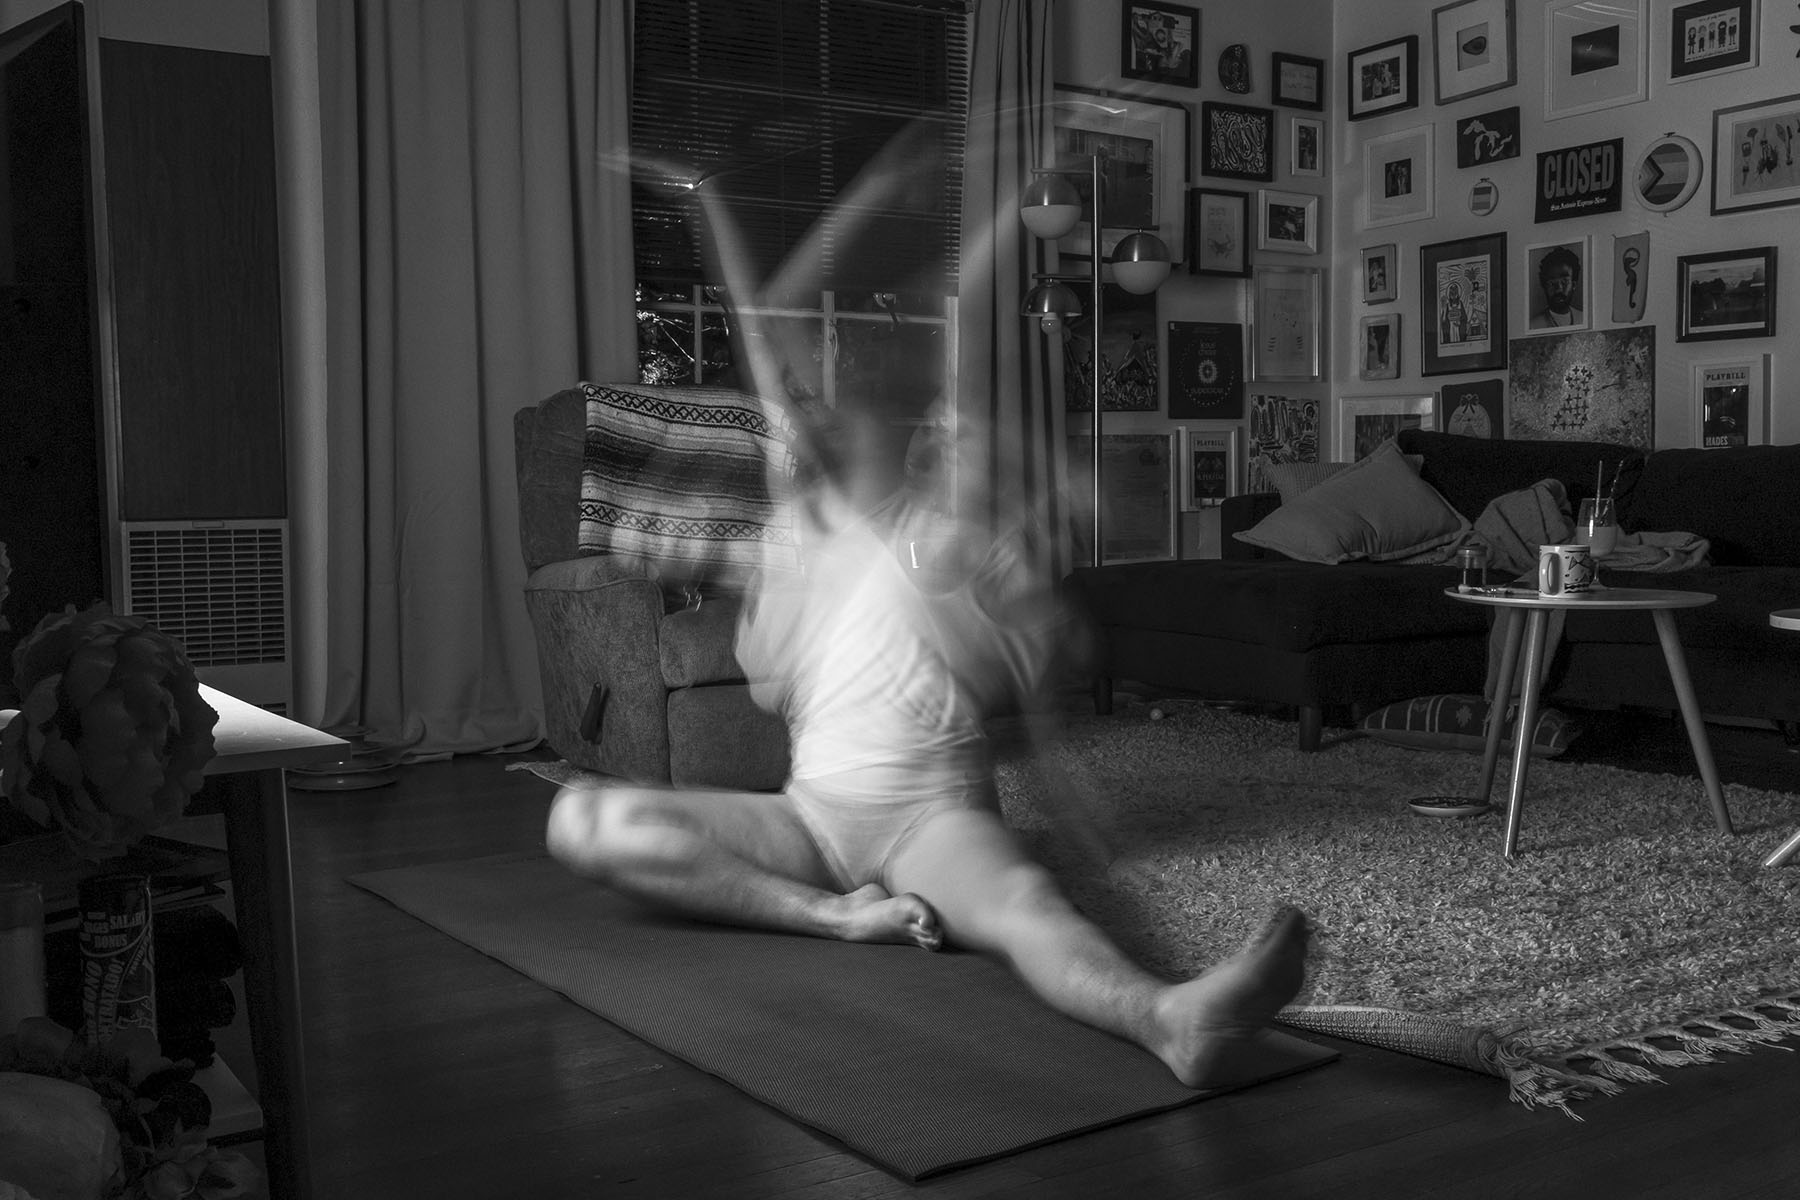 In a long exposure photograph, Josie Norris practice yoga in their living room at home on Sept. 26, 2022, in San Antonio, Texas. “After years of casually doing yoga, I started 2022 with over four months of a daily yoga practice. The benefits I felt were holistic and hard to sum up but my intuition started speaking up louder than it used to. But more importantly, I’ve been listening to what it says. When I step off the mat, I feel my body and mind reunited.”